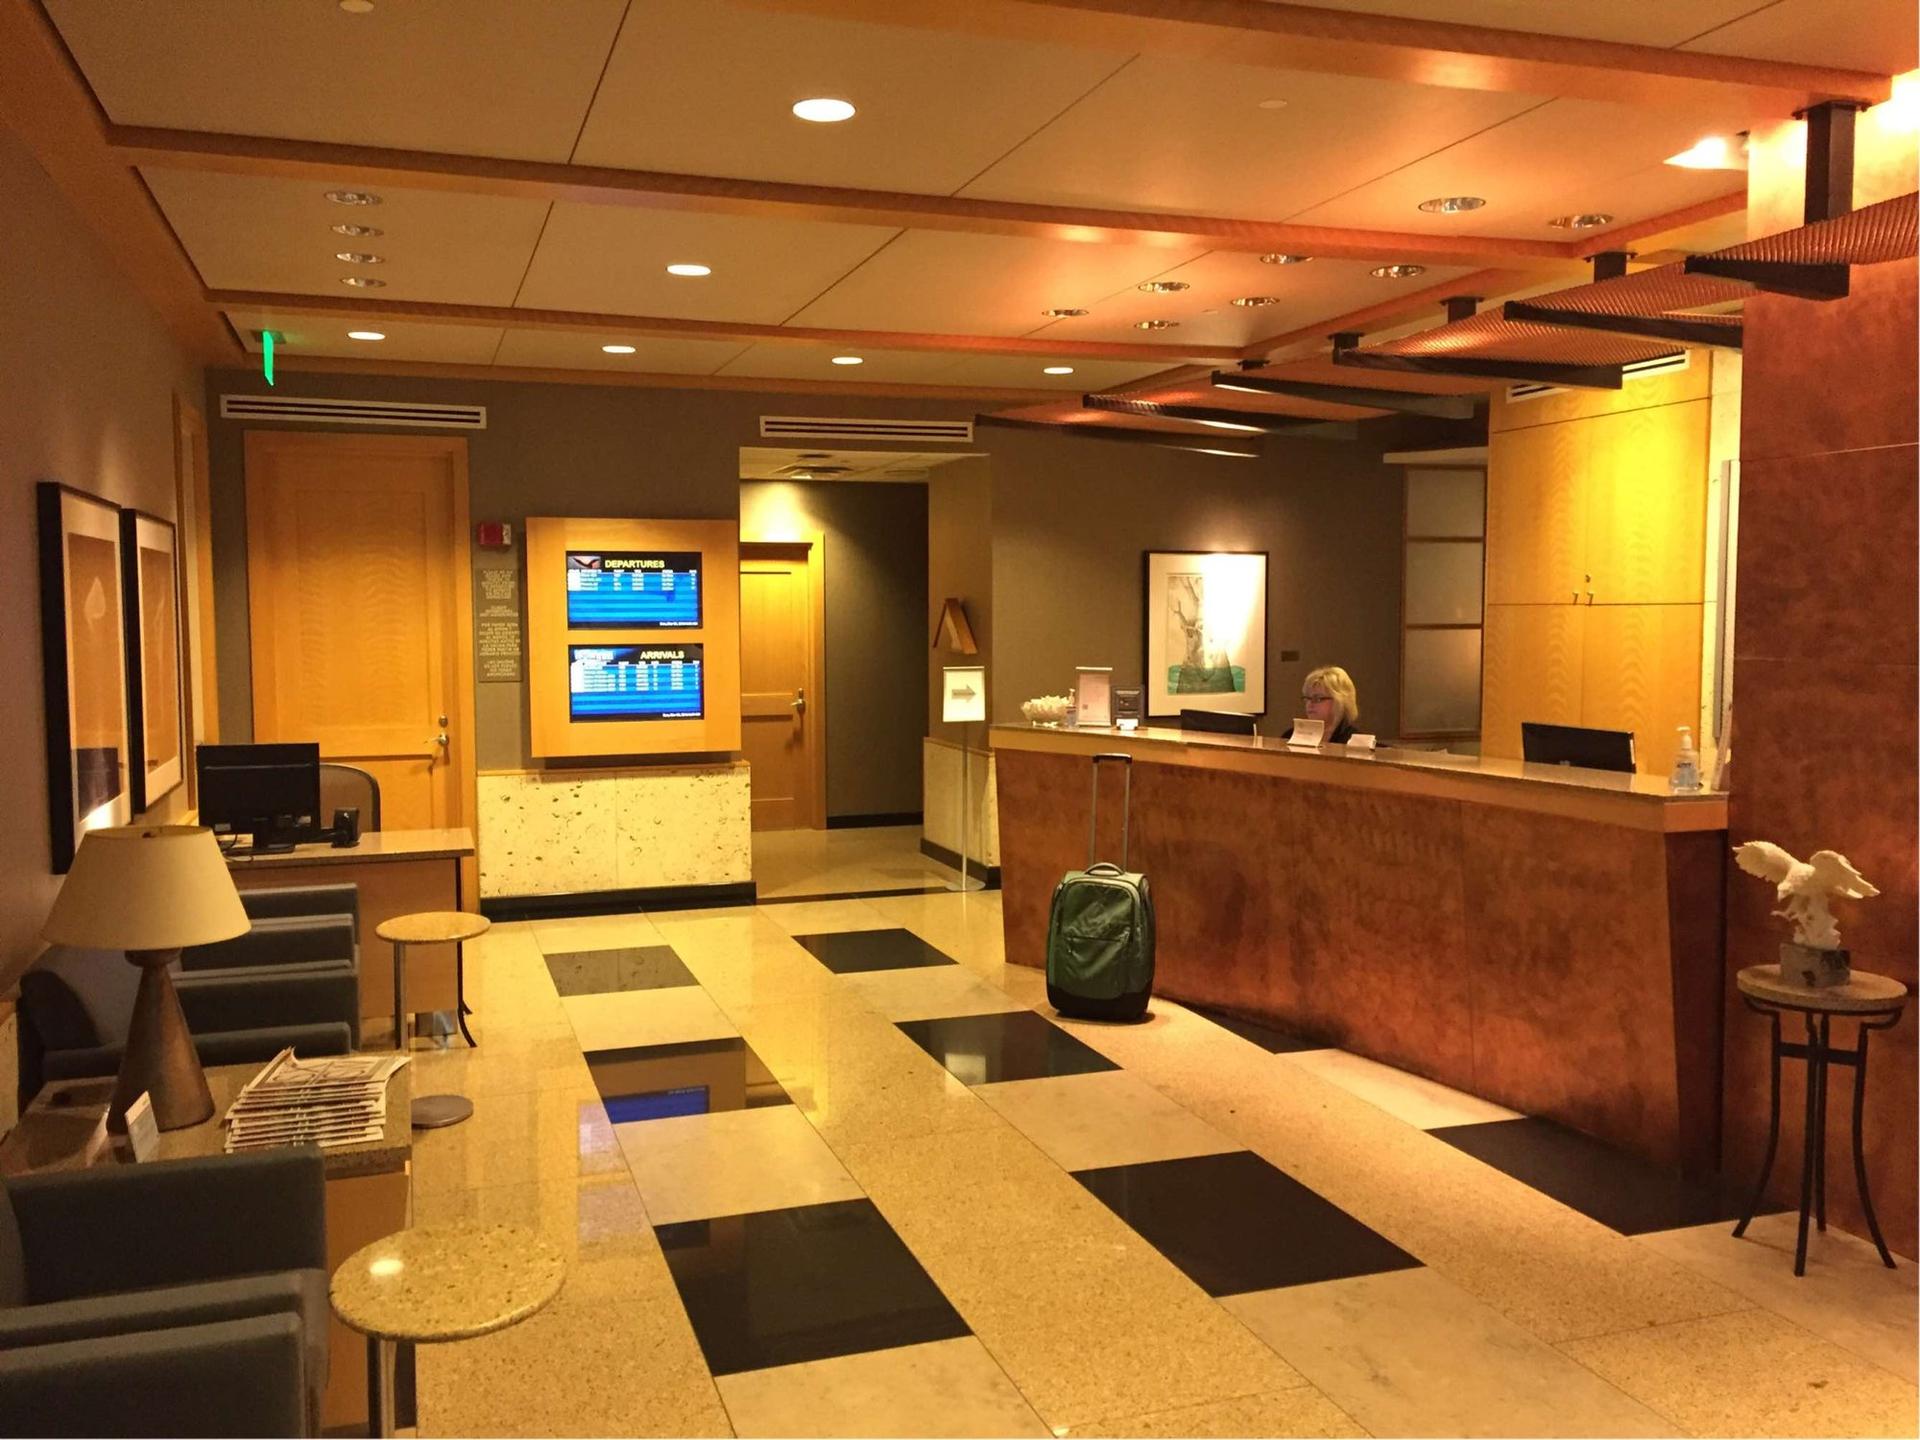 American Airlines Admirals Club image 2 of 14